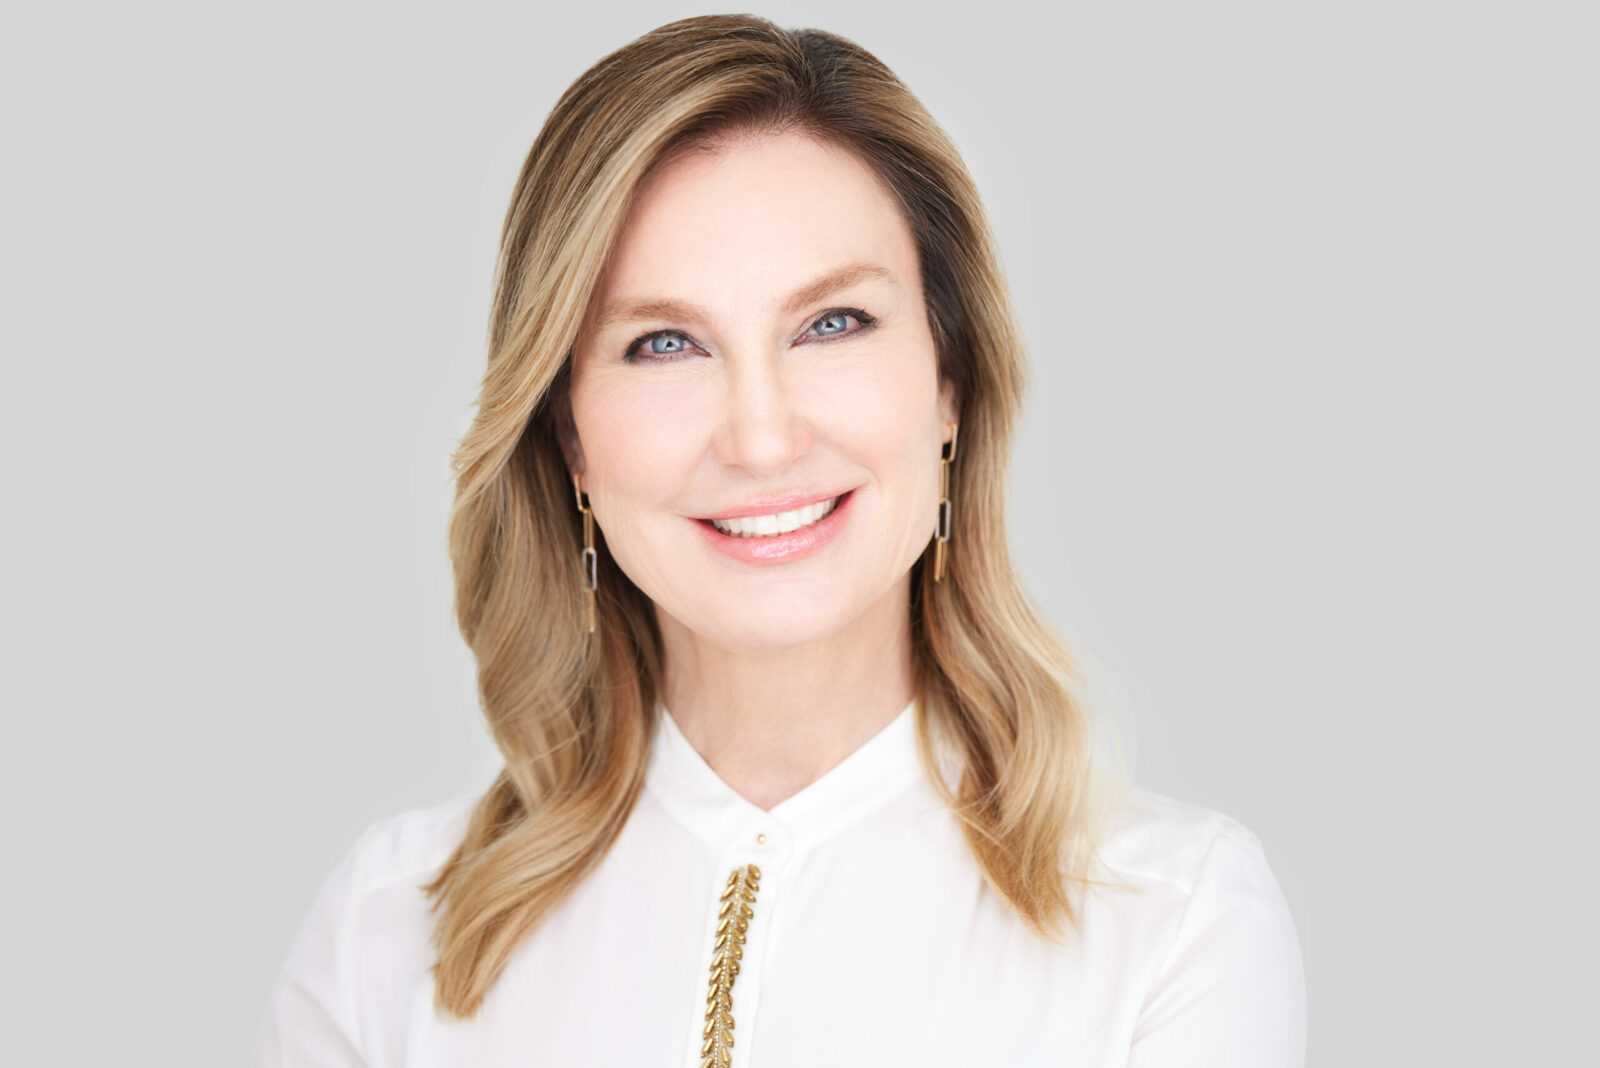 Dr. Sue Ellen Cox leader in aesthetic medicine and dermatology, founder and director of Aesthetic Solutions in Chapel Hill, North Carolina.